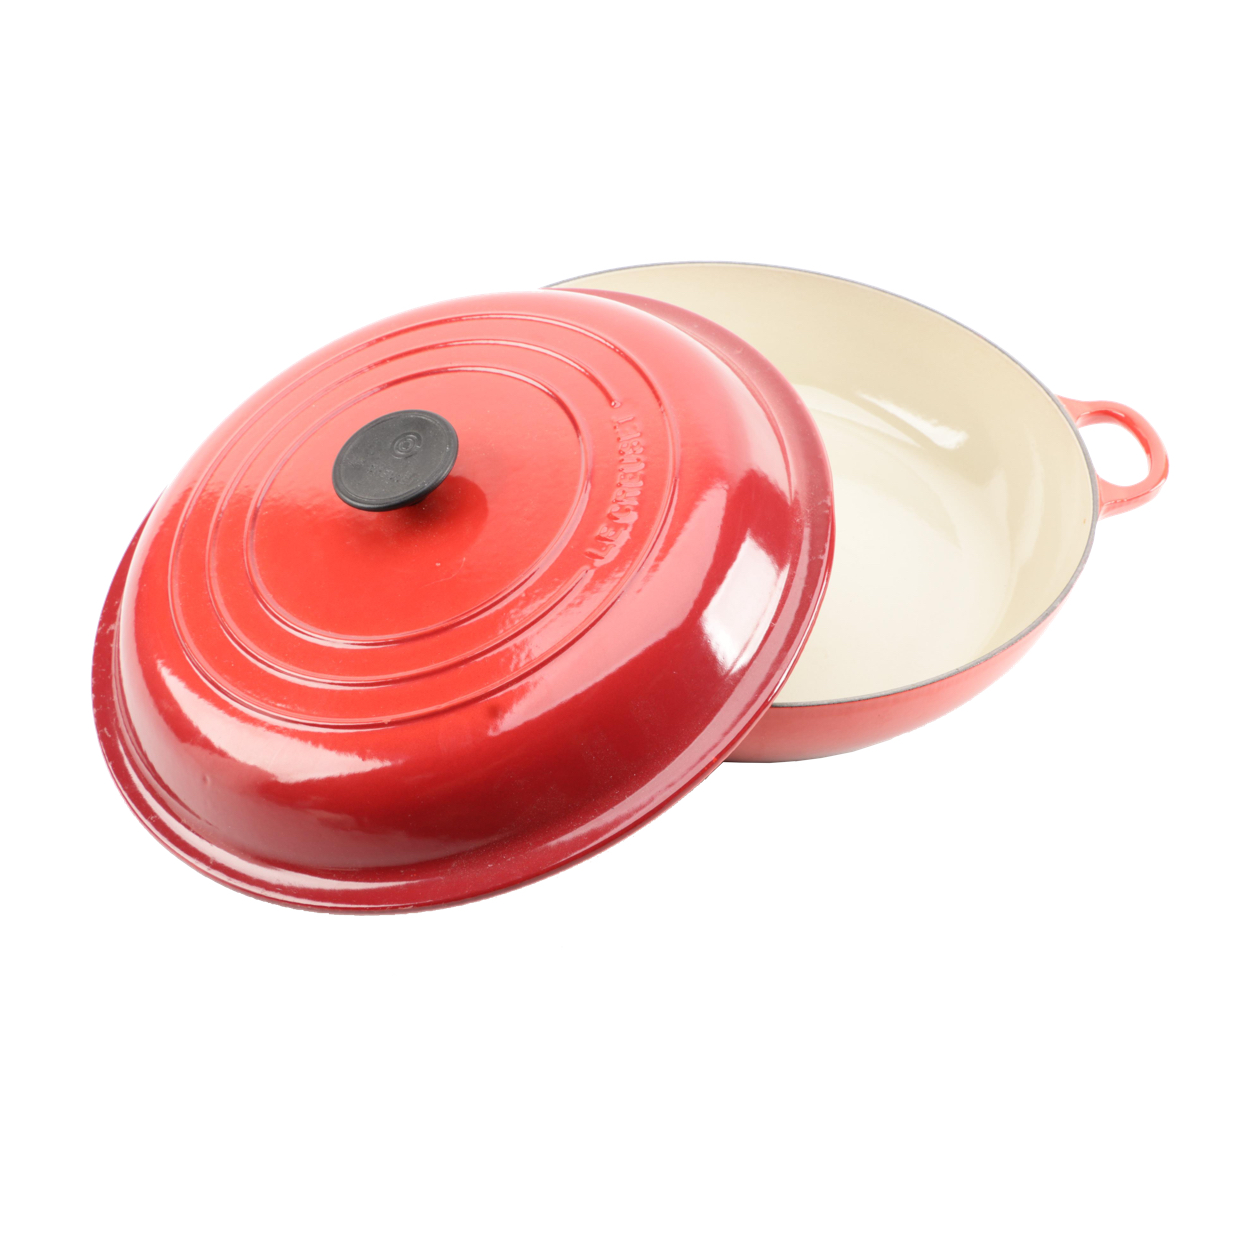 French Le Creuset Red Enameled Cast Iron Bakeware